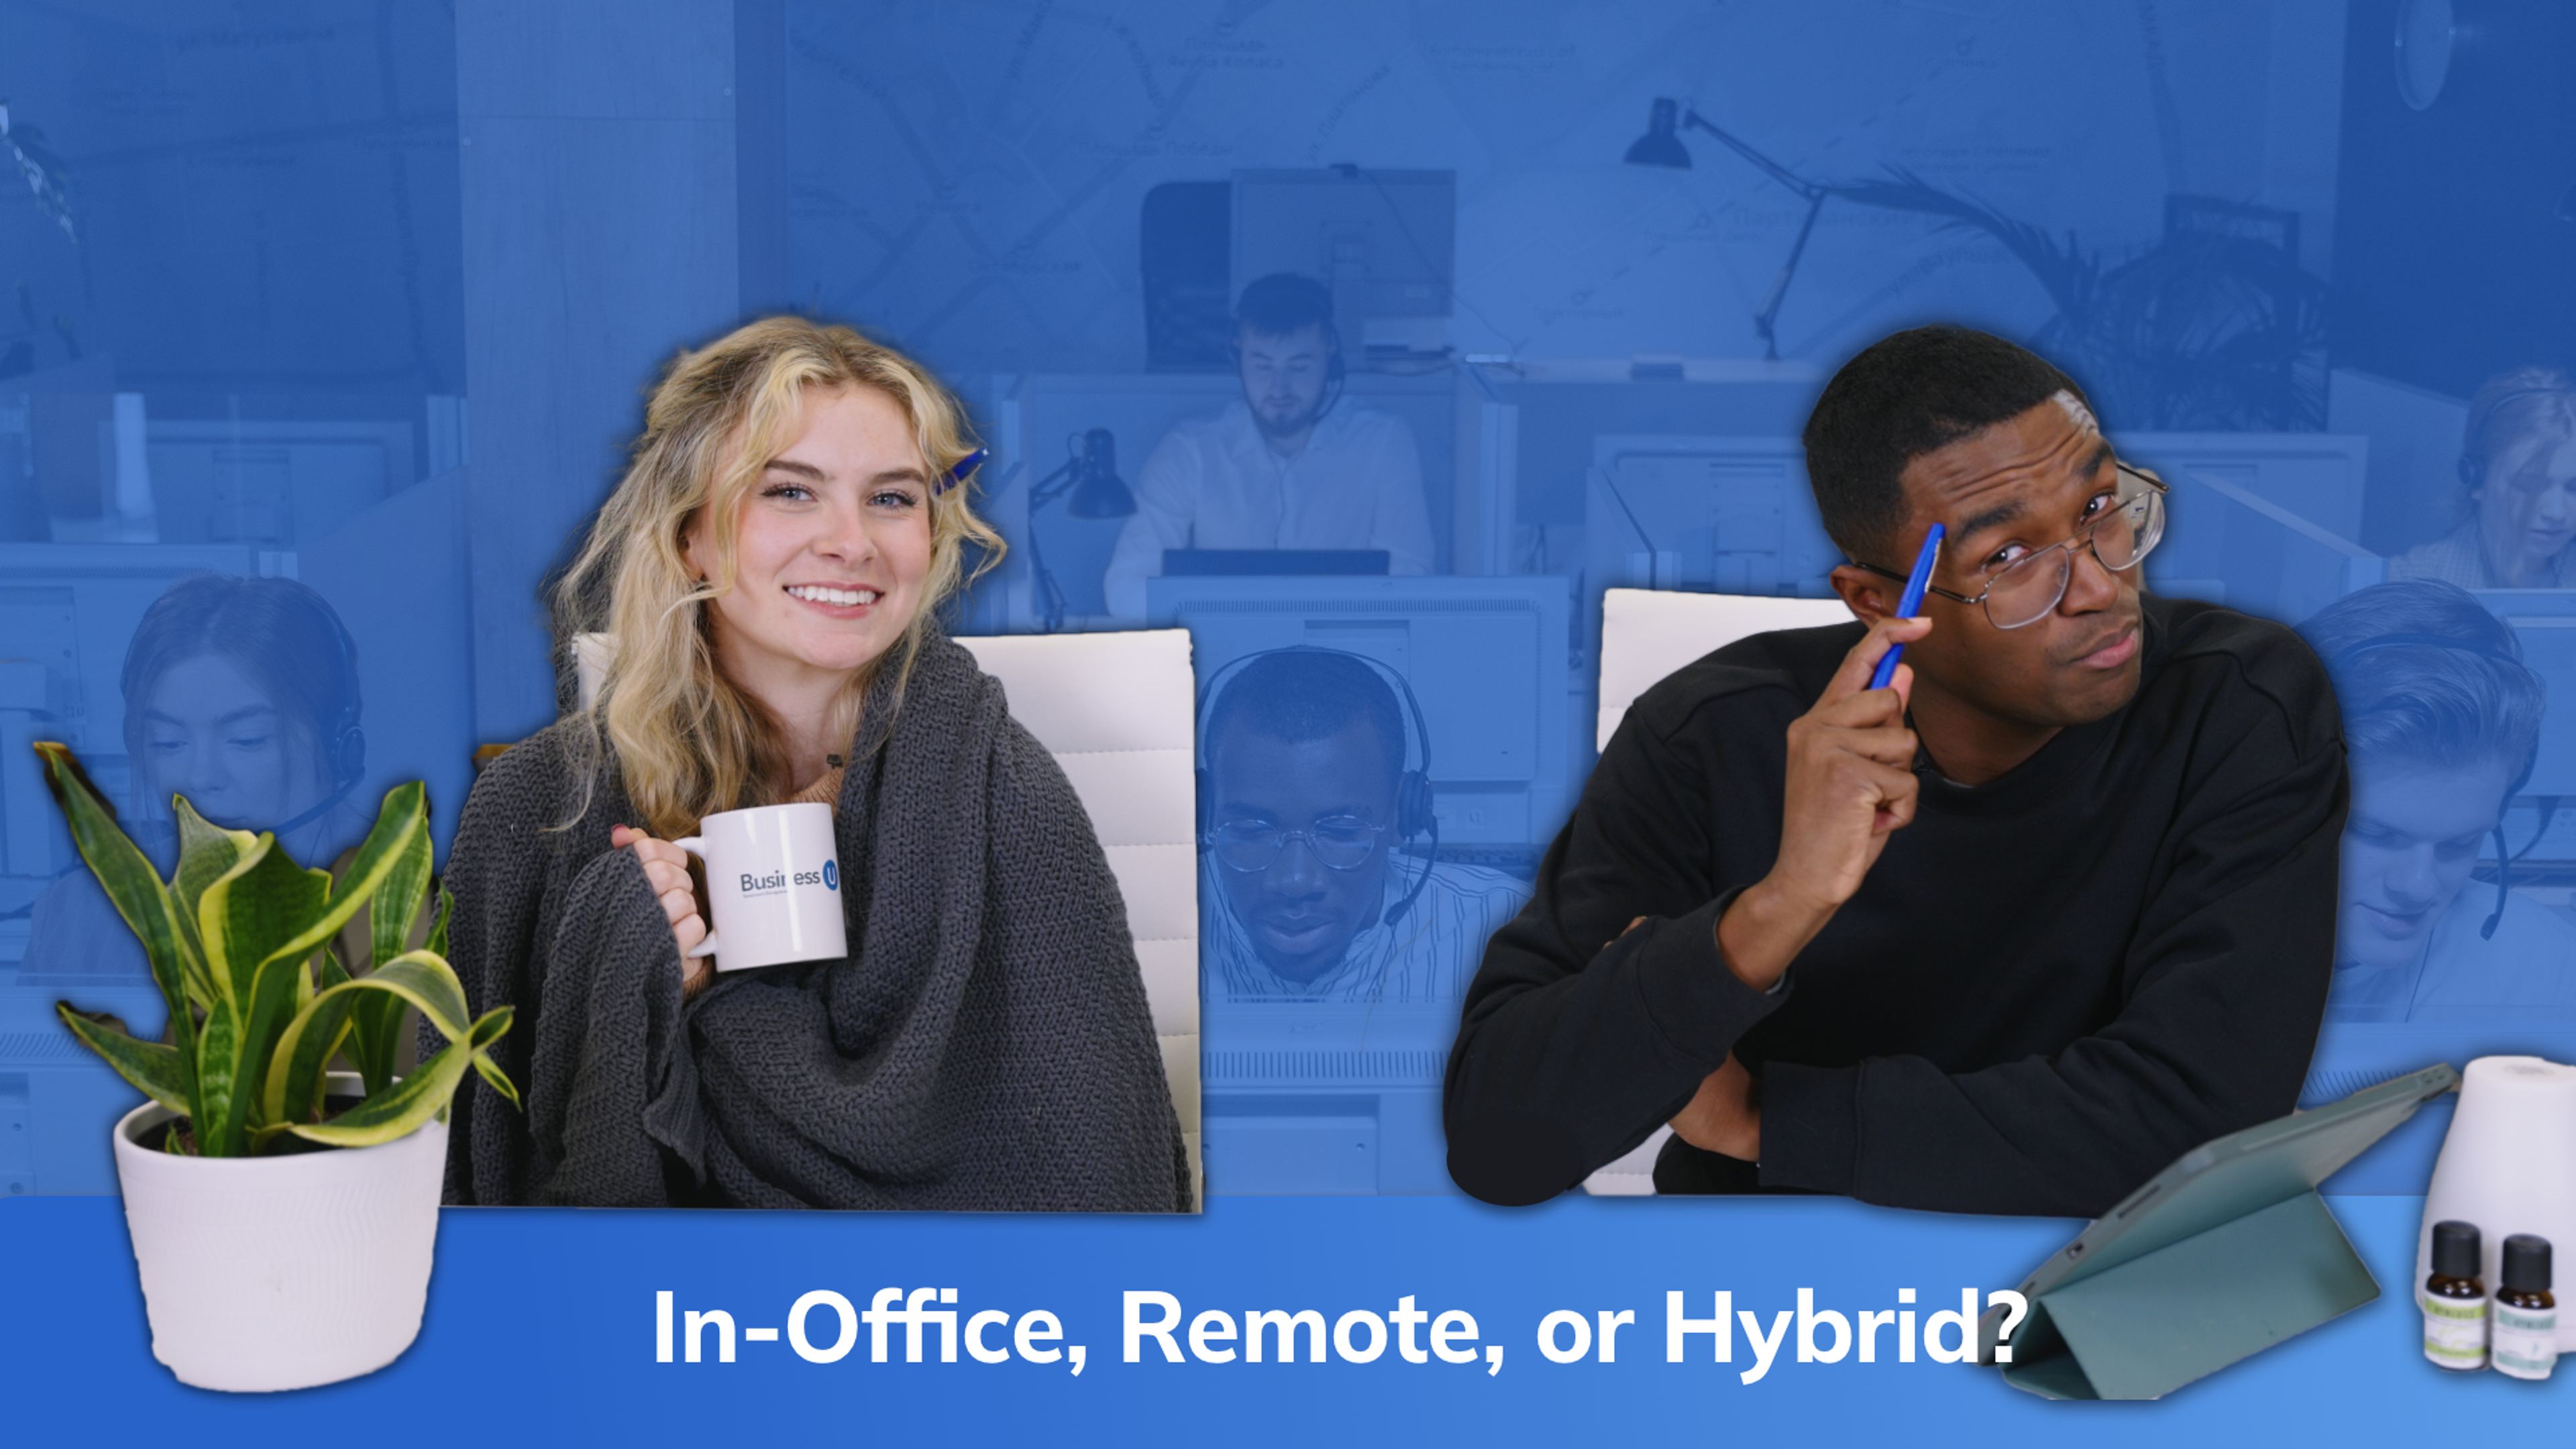 In-Office, Remote, or Hybrid?